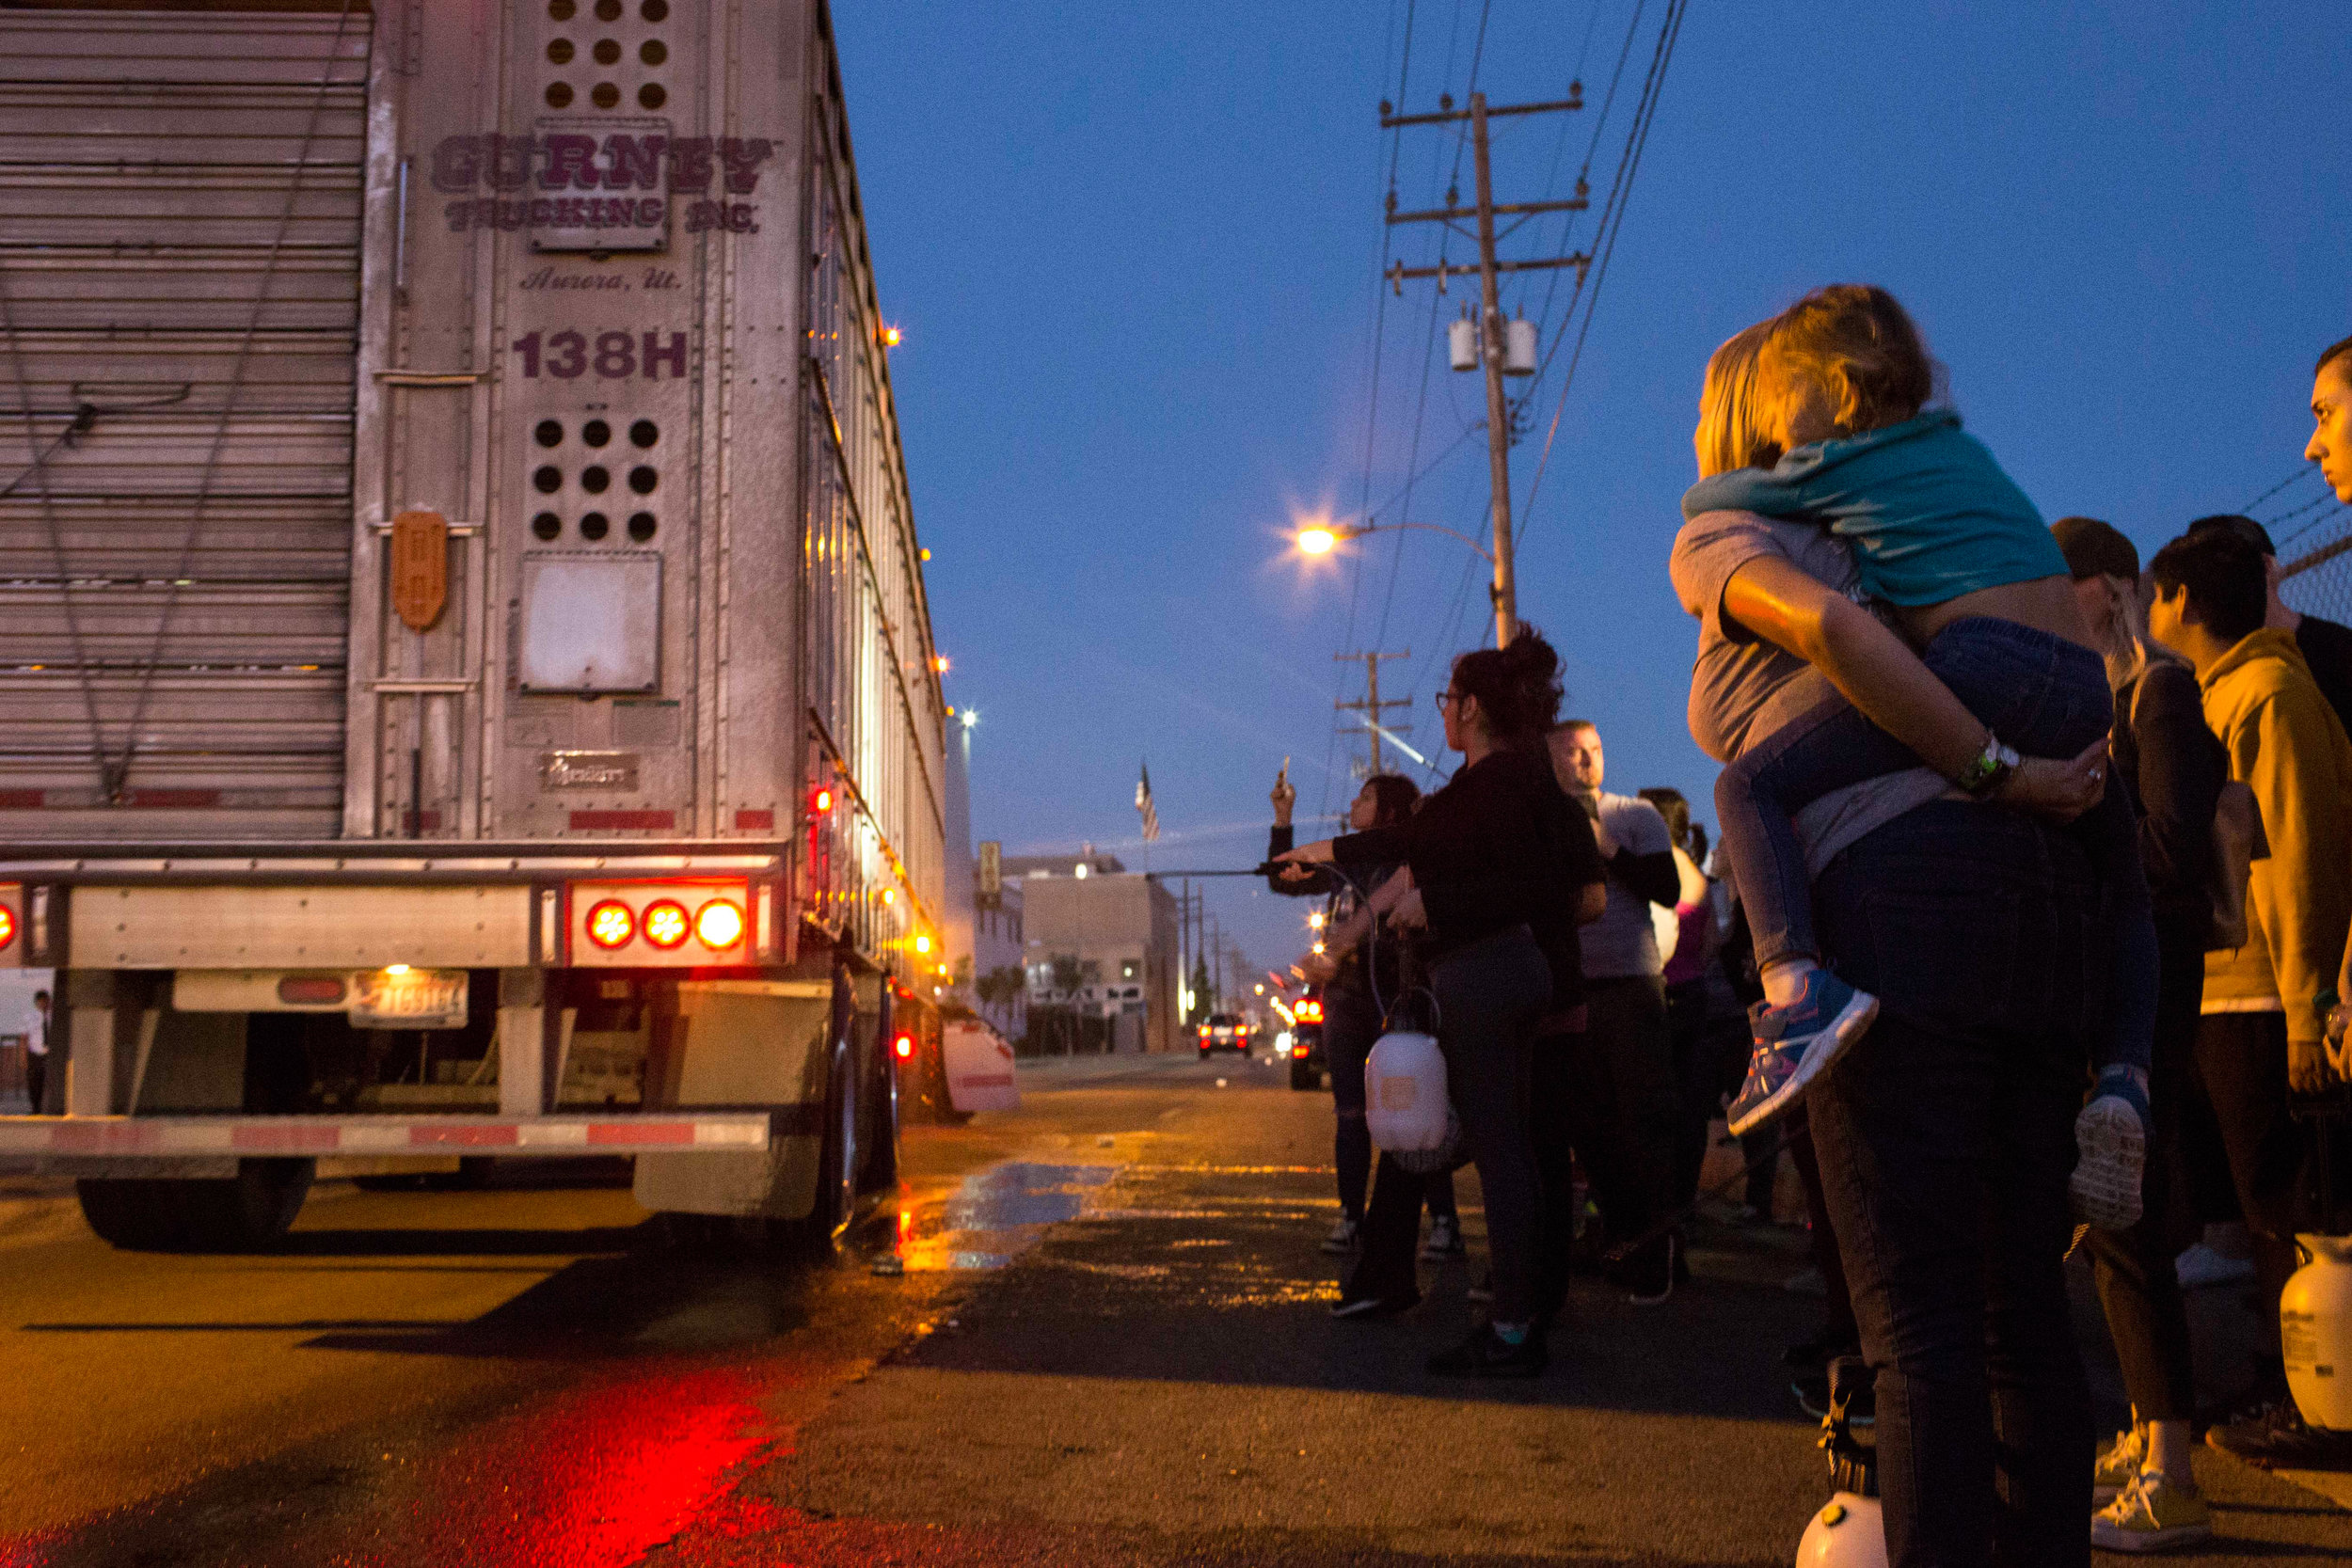  Heidi Menze, holding her daughter, Alexis (5) on her back,  watches as a truck pulls in through the gate of Farmer John, a slaughterhouse in Vernon, CA, carrying pigs destined for slaughter on April 30 2017 photo by Ruth Iorio 